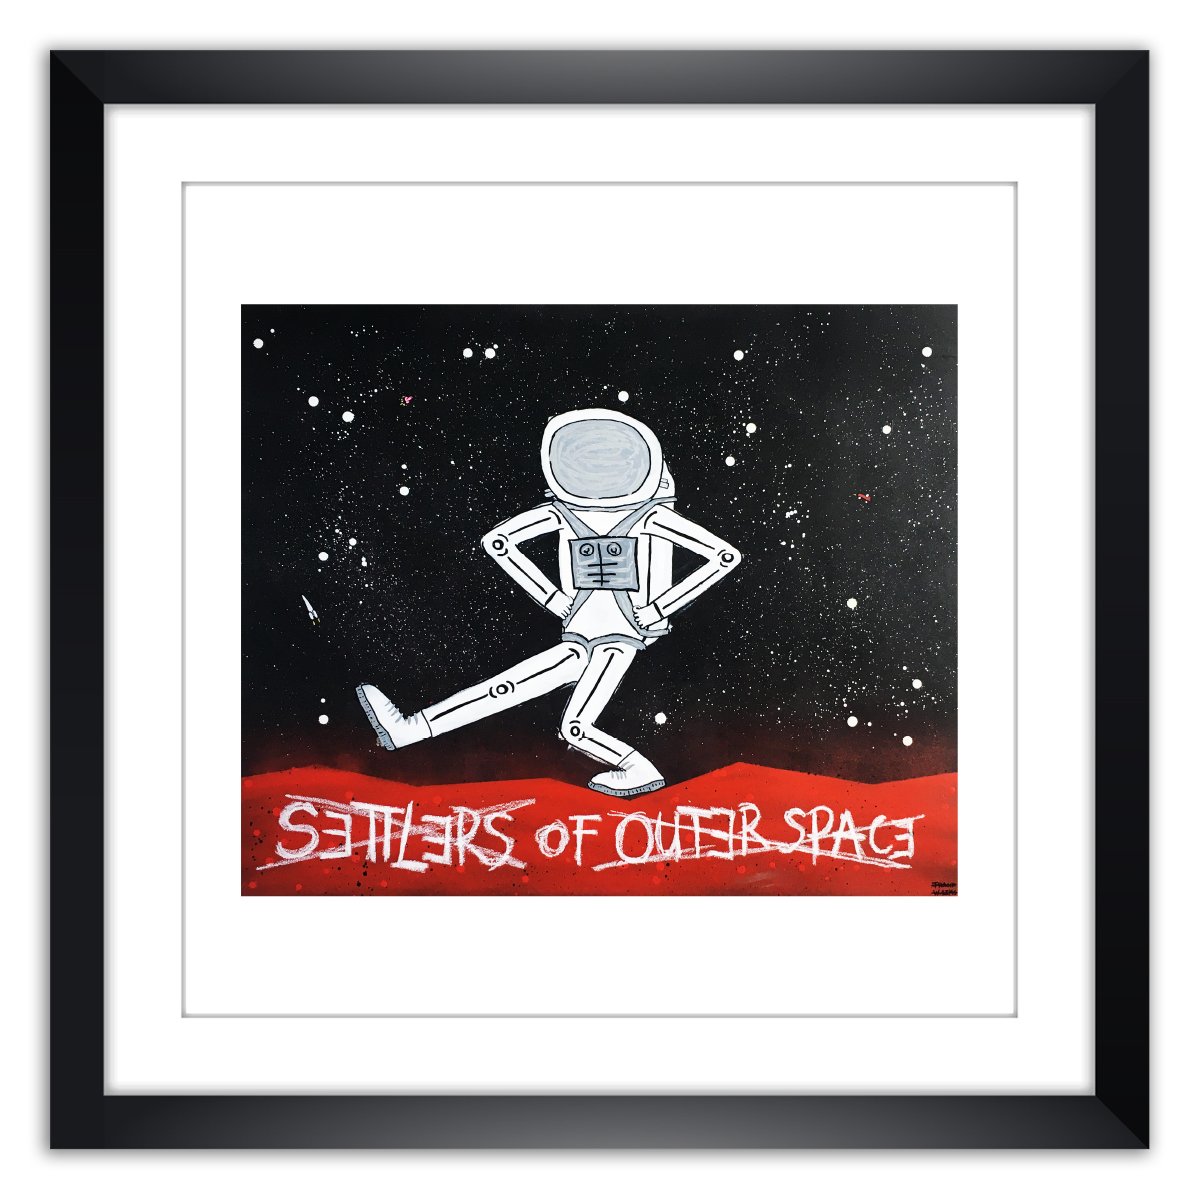 Limited prints - SETTLERS OF OUTER SPACE framed - Frank Willems